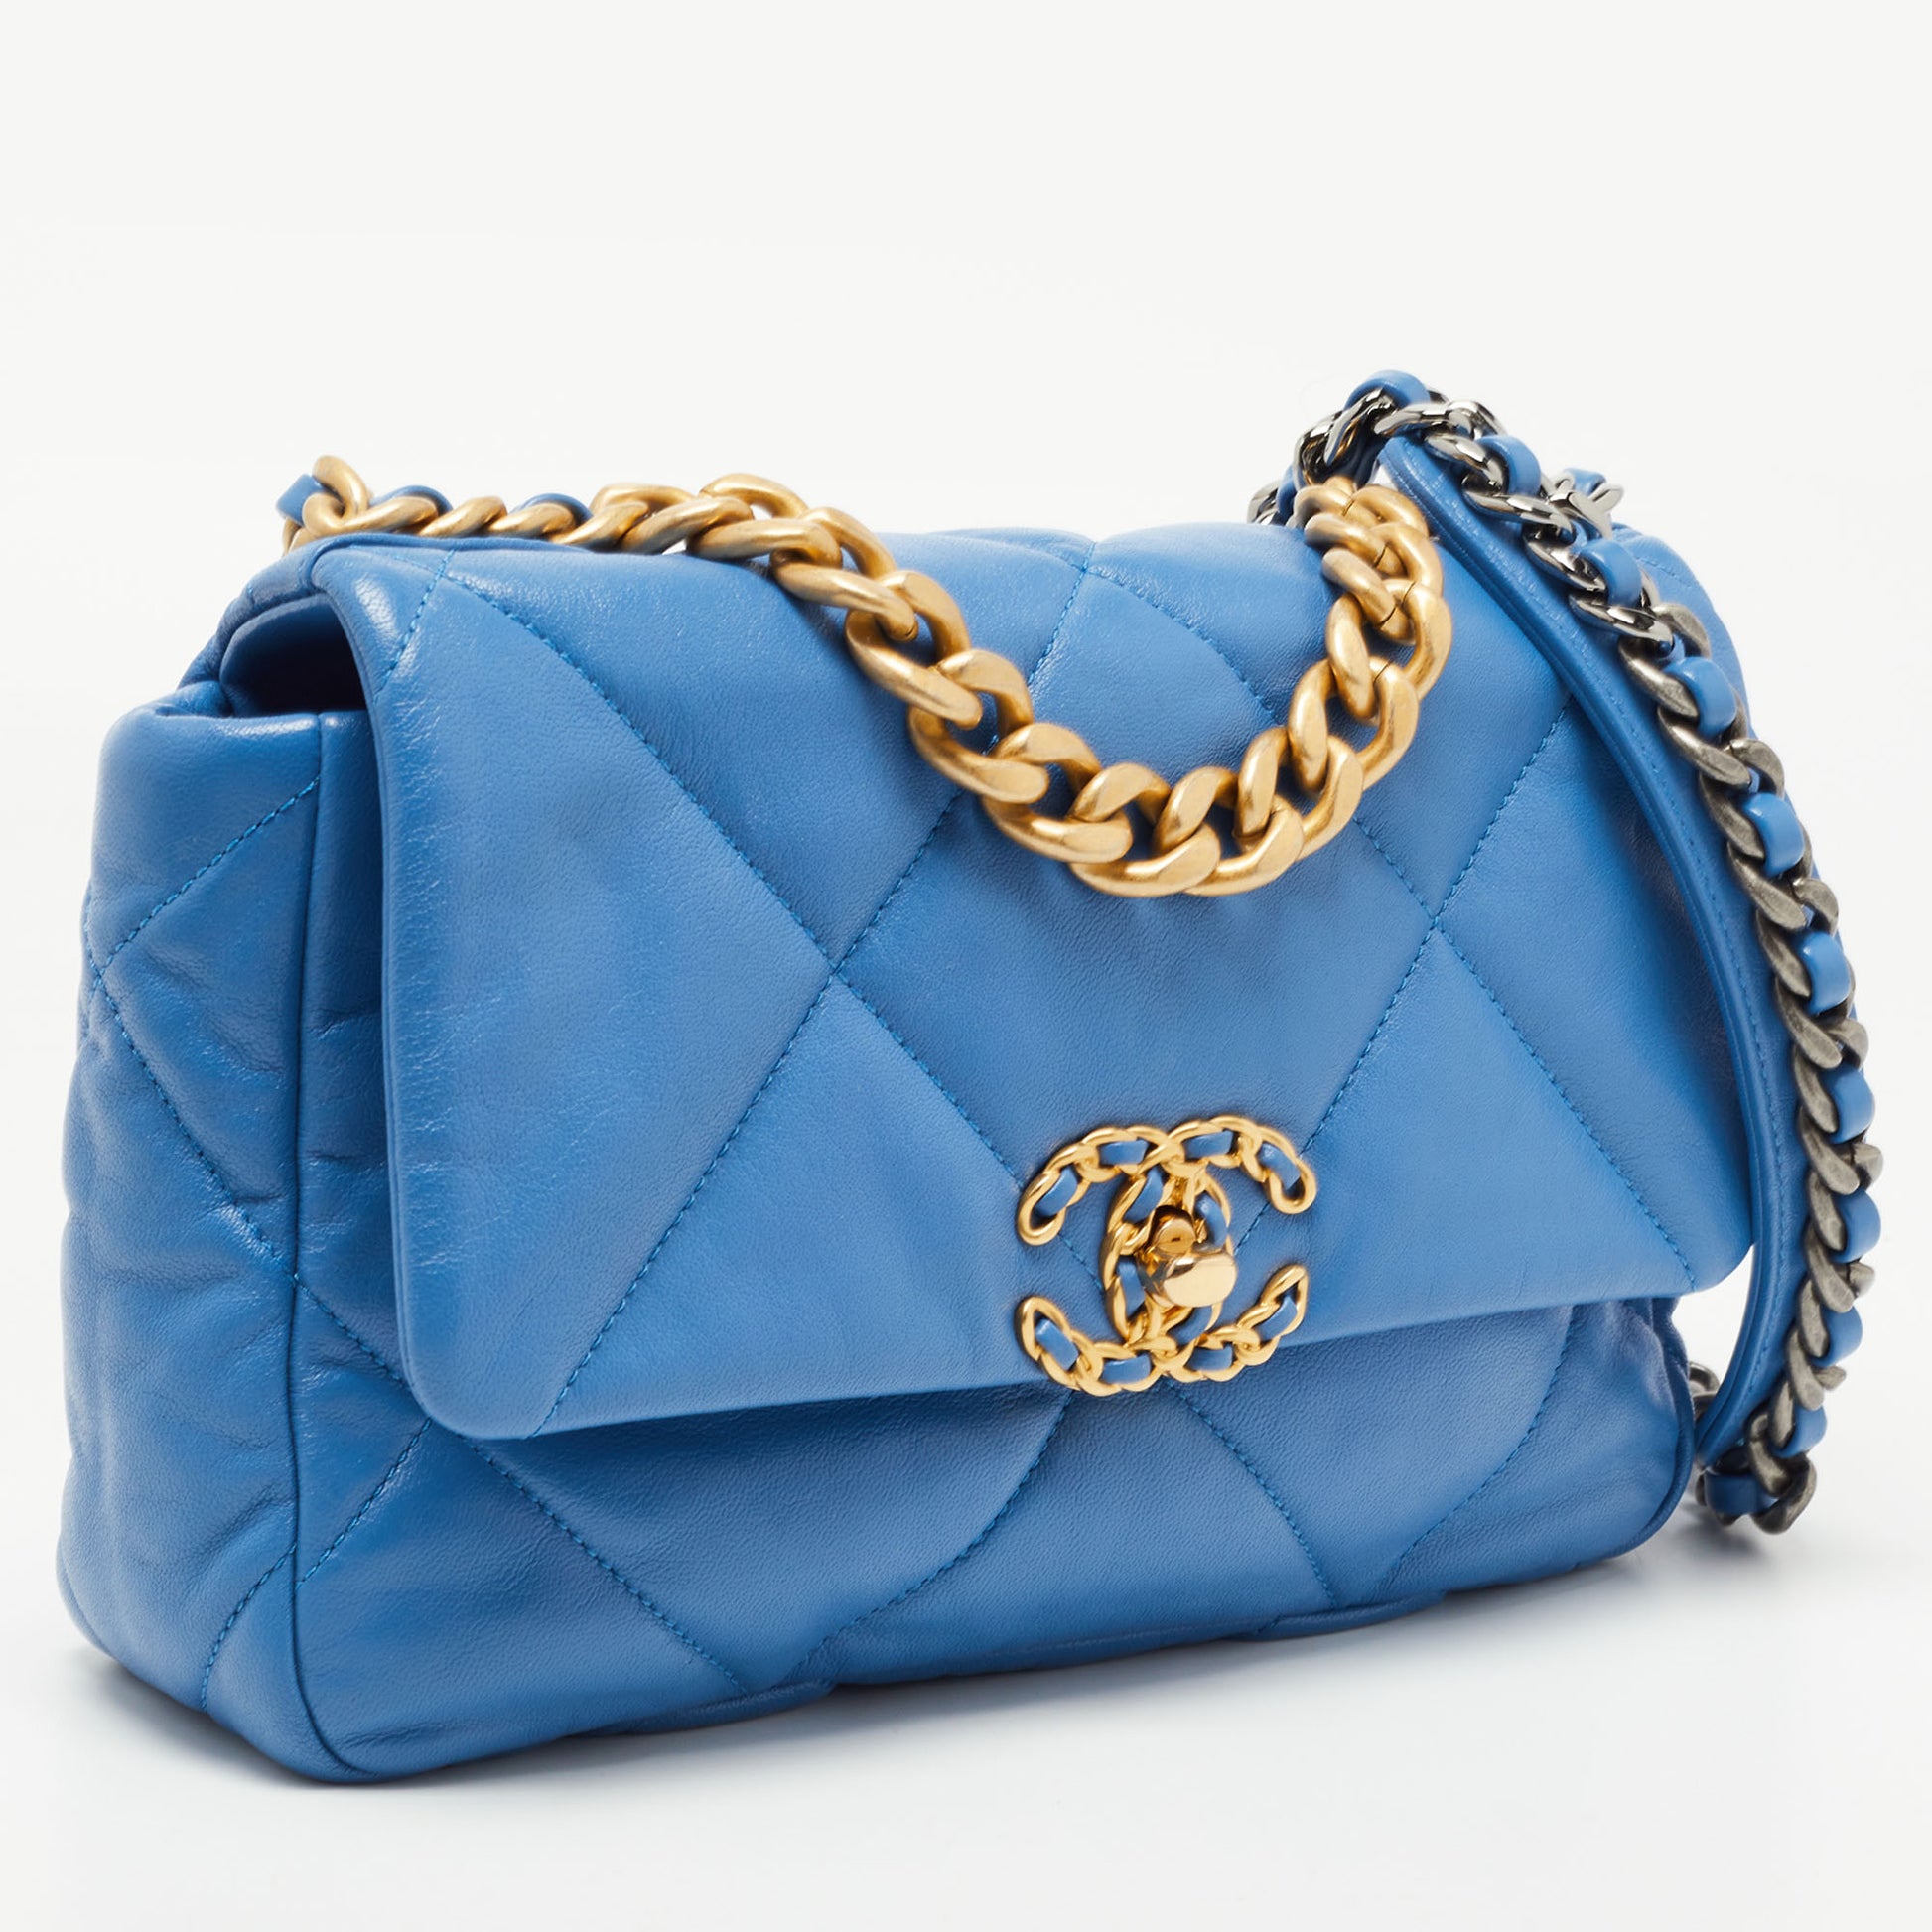 Chanel Blue Quilted Leather CC 19 Flap Bag